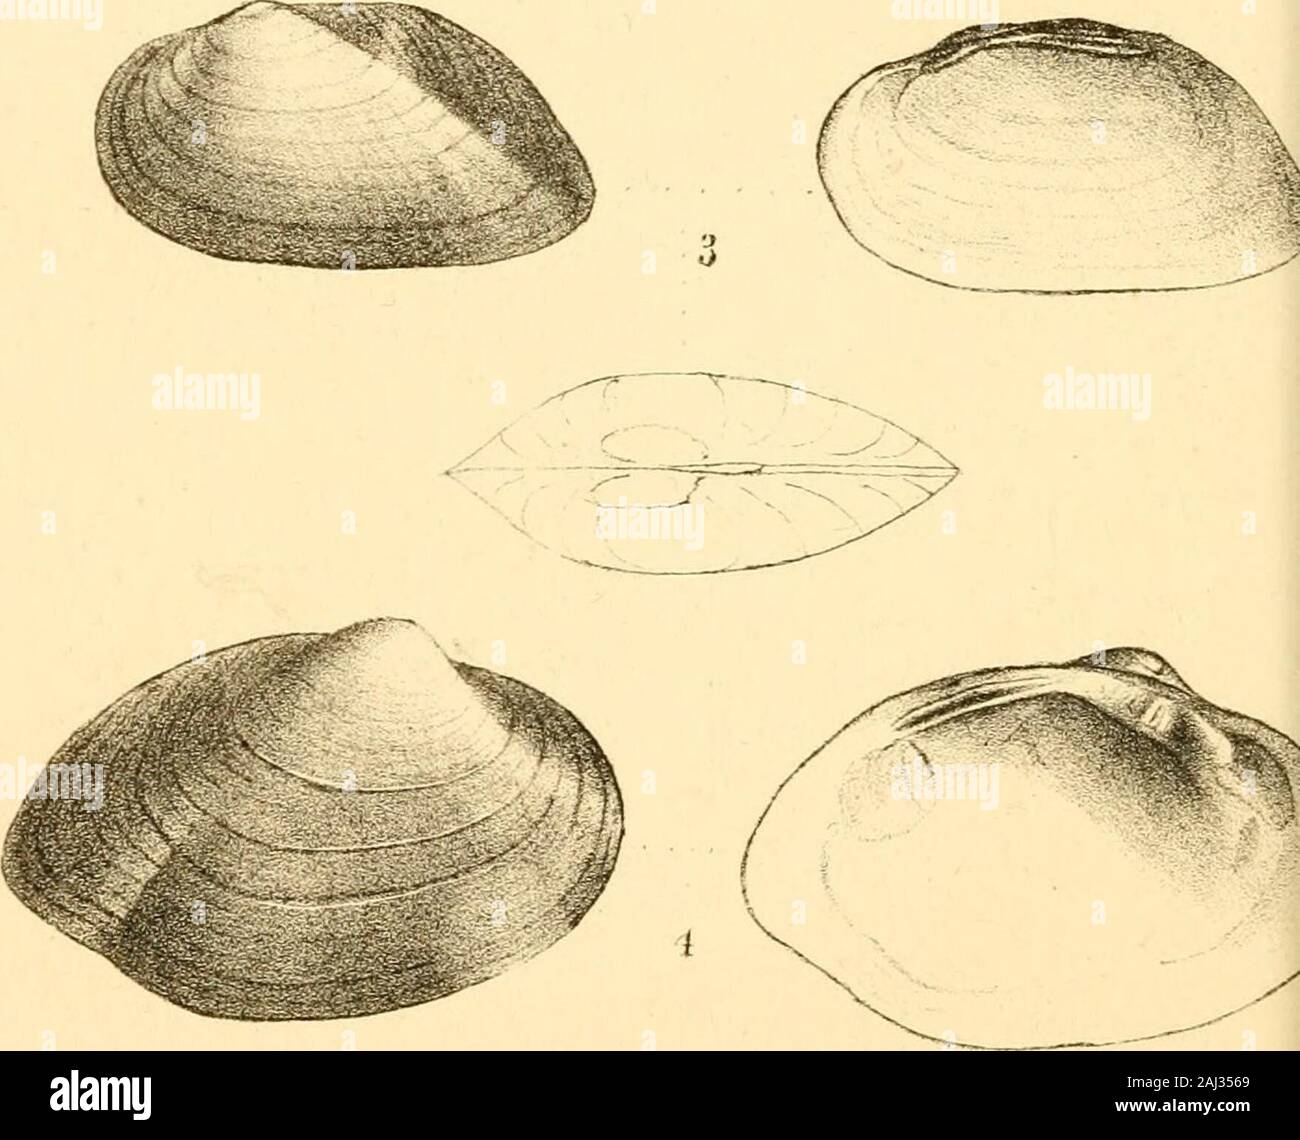 Monography of the family Unionidæ : or, Naiades of Lamarck (fresh water bivalve shells) of North America ... . / 1 l . -. / hrterodon L-: 3 1 constrictus, Conr/fd 91UNIO LIENOSUS. VARIETY CONSTRICTUS.Plate XLIX.—Fig. 4. DESCRIPTION. Shell elliptical, ventricose; beaks rather prominent,undulated, distant from the anterior margin; posteriorside furrowed, contracted at base; posterior anglemuch above the line of the base; epidermis obscurelyrayed; within white; cardinal teeth robust. Cab. A. N. S., No. 20423. OBSERVATIONS. Inhabits North river, Rockbridge county, Virginia.Several specimens of t Stock Photo